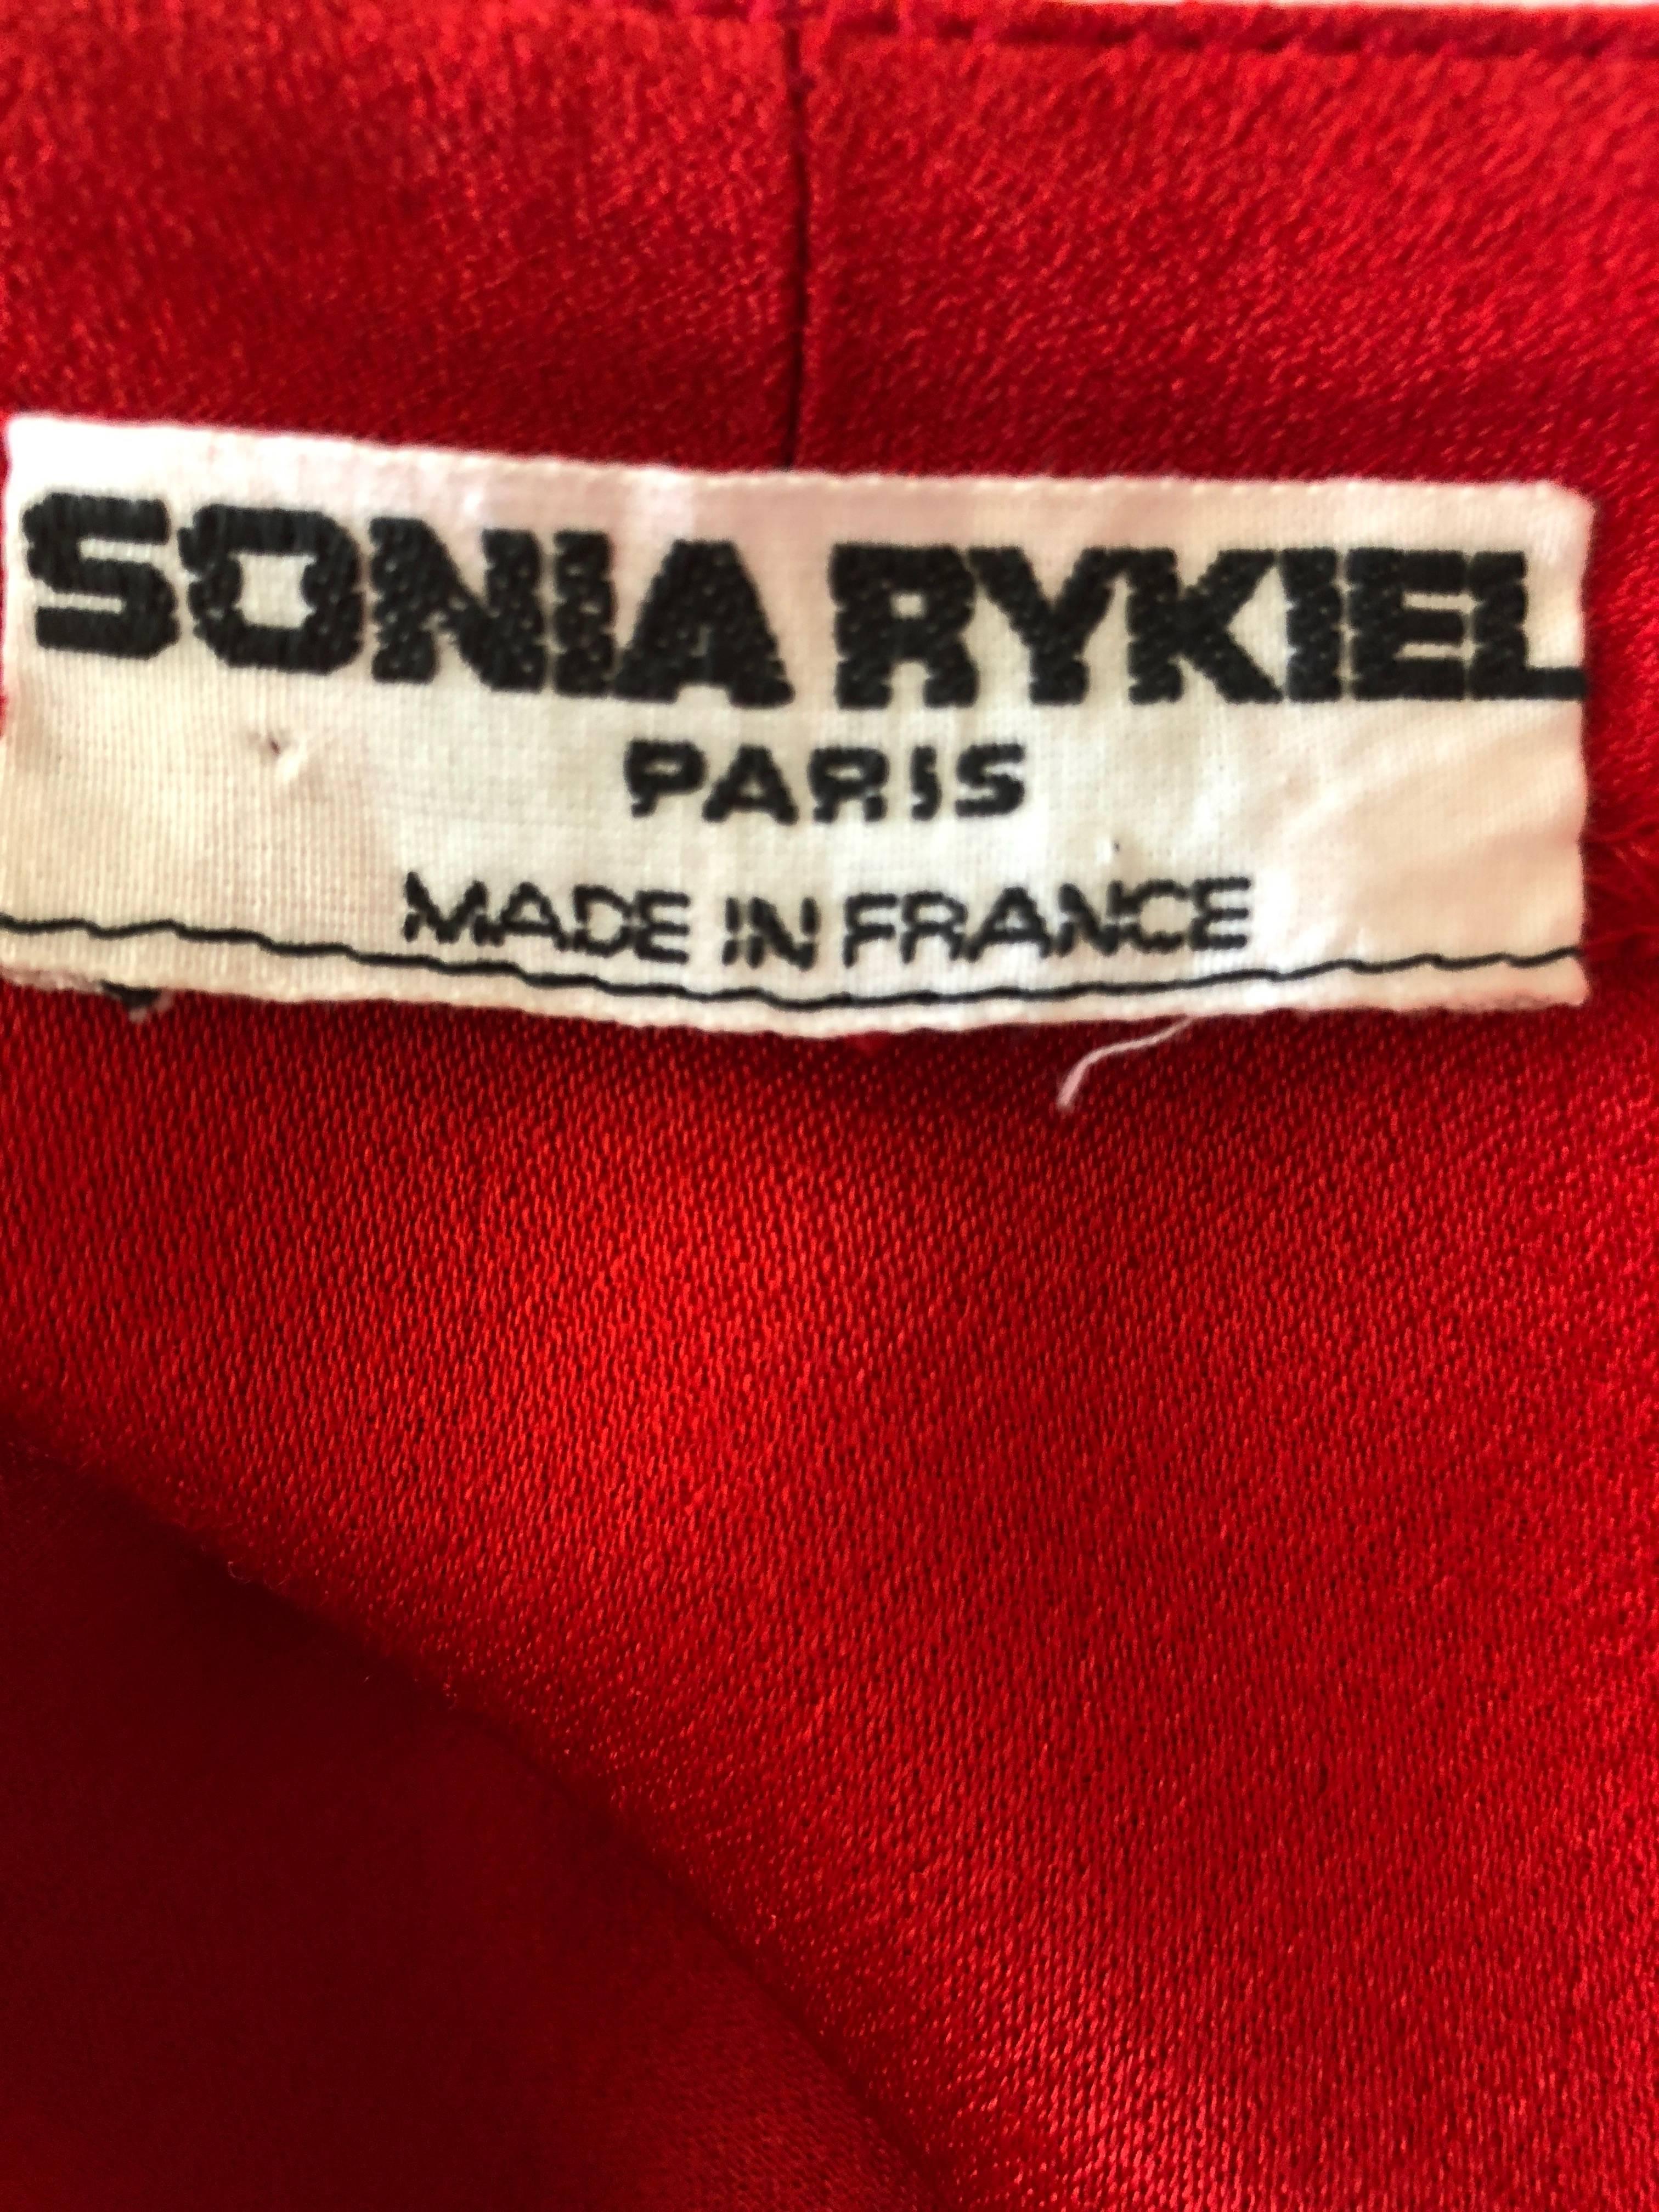 Sonia Rykiel Unusual Vintage 1980's Red Side Slashed Kimono Style Coat
Very voluminous, with  open sides.
Bust 60